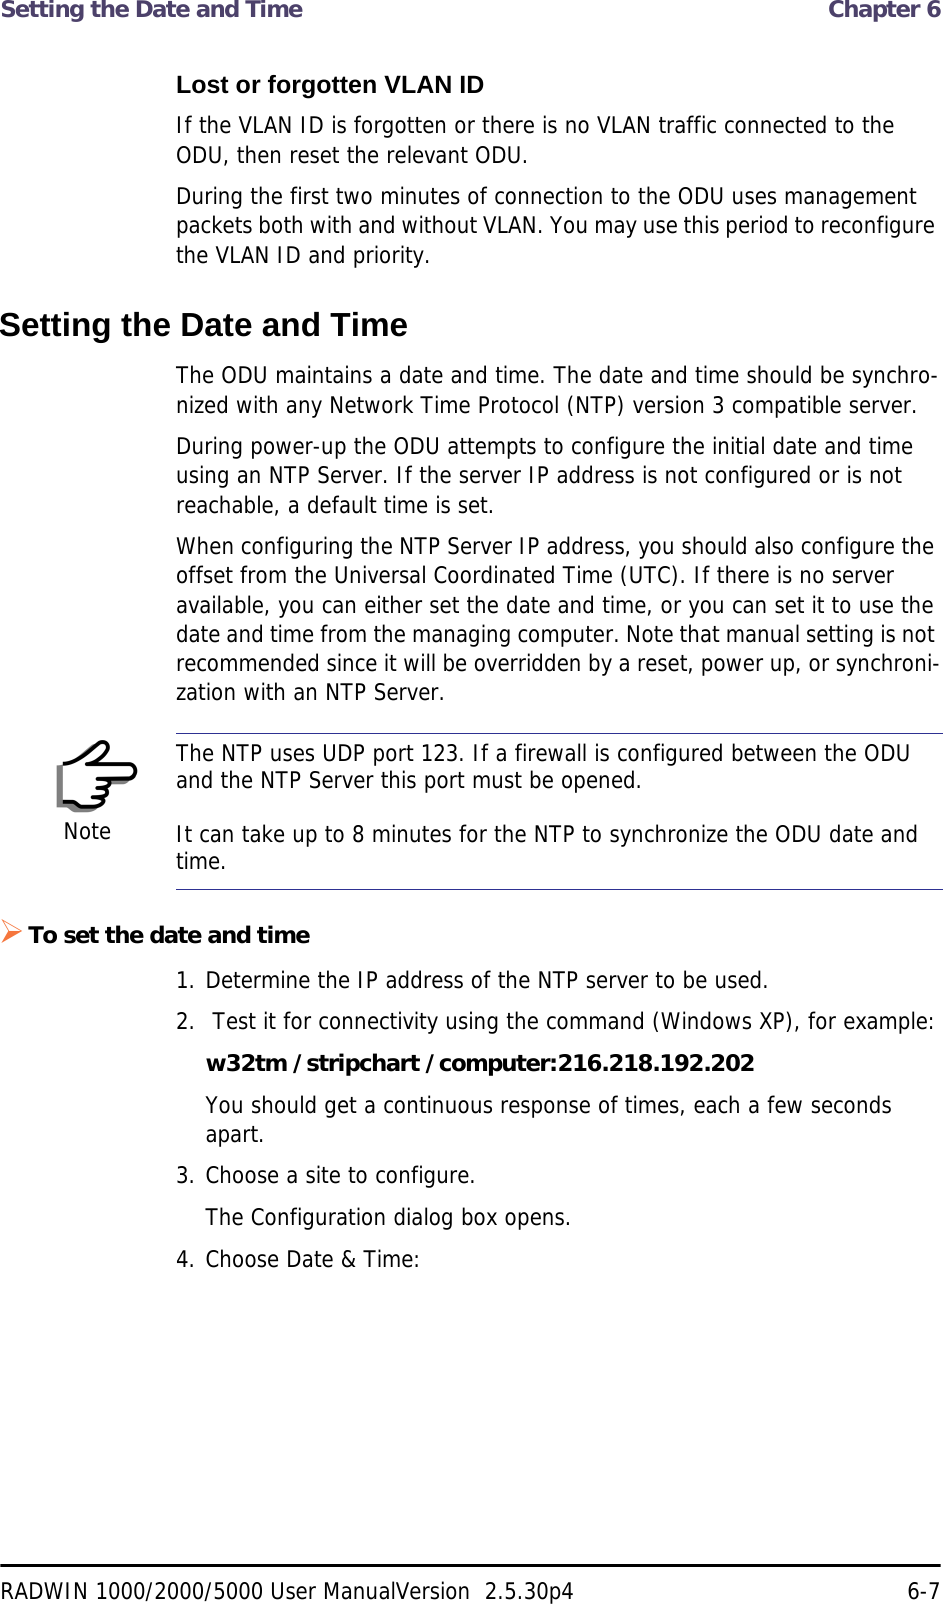 Setting the Date and Time  Chapter 6RADWIN 1000/2000/5000 User ManualVersion  2.5.30p4 6-7Lost or forgotten VLAN IDIf the VLAN ID is forgotten or there is no VLAN traffic connected to the ODU, then reset the relevant ODU.During the first two minutes of connection to the ODU uses management packets both with and without VLAN. You may use this period to reconfigure the VLAN ID and priority.Setting the Date and TimeThe ODU maintains a date and time. The date and time should be synchro-nized with any Network Time Protocol (NTP) version 3 compatible server.During power-up the ODU attempts to configure the initial date and time using an NTP Server. If the server IP address is not configured or is not reachable, a default time is set.When configuring the NTP Server IP address, you should also configure the offset from the Universal Coordinated Time (UTC). If there is no server available, you can either set the date and time, or you can set it to use the date and time from the managing computer. Note that manual setting is not recommended since it will be overridden by a reset, power up, or synchroni-zation with an NTP Server.To set the date and time1. Determine the IP address of the NTP server to be used.2.  Test it for connectivity using the command (Windows XP), for example:w32tm /stripchart /computer:216.218.192.202You should get a continuous response of times, each a few seconds apart.3. Choose a site to configure.The Configuration dialog box opens.4. Choose Date &amp; Time:NoteThe NTP uses UDP port 123. If a firewall is configured between the ODU and the NTP Server this port must be opened.It can take up to 8 minutes for the NTP to synchronize the ODU date and time.